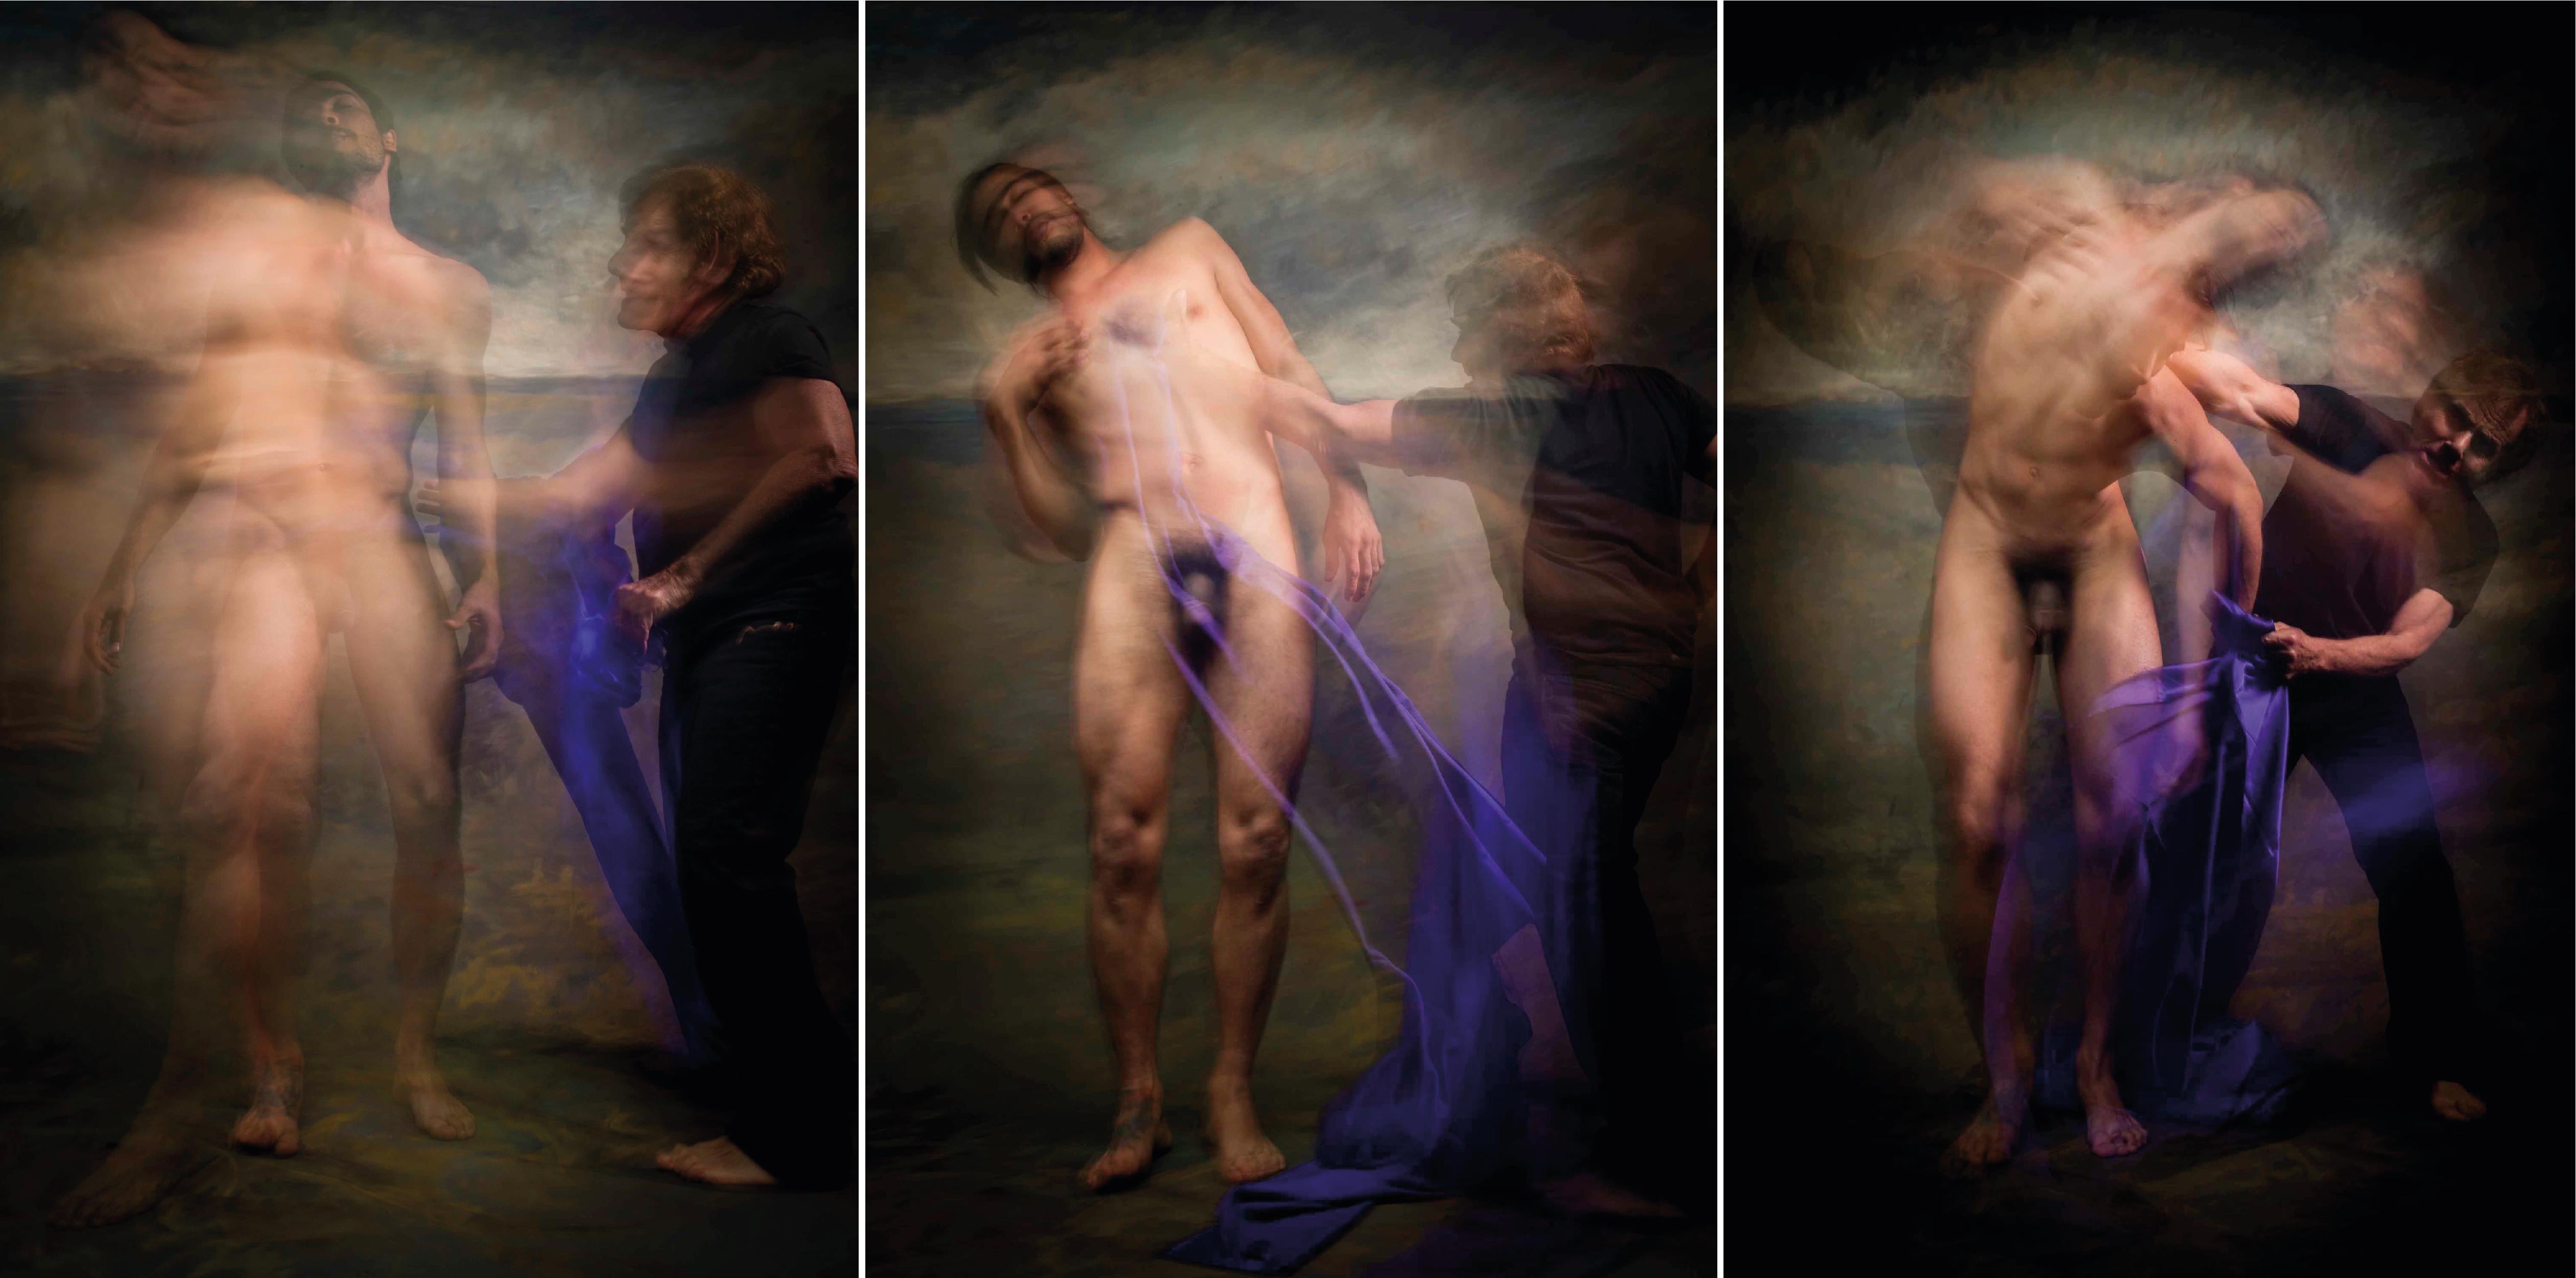 Mauricio Velez Color Photograph - Untitled II, V and III, From the Half Angels Half Demons series. Male nude photo